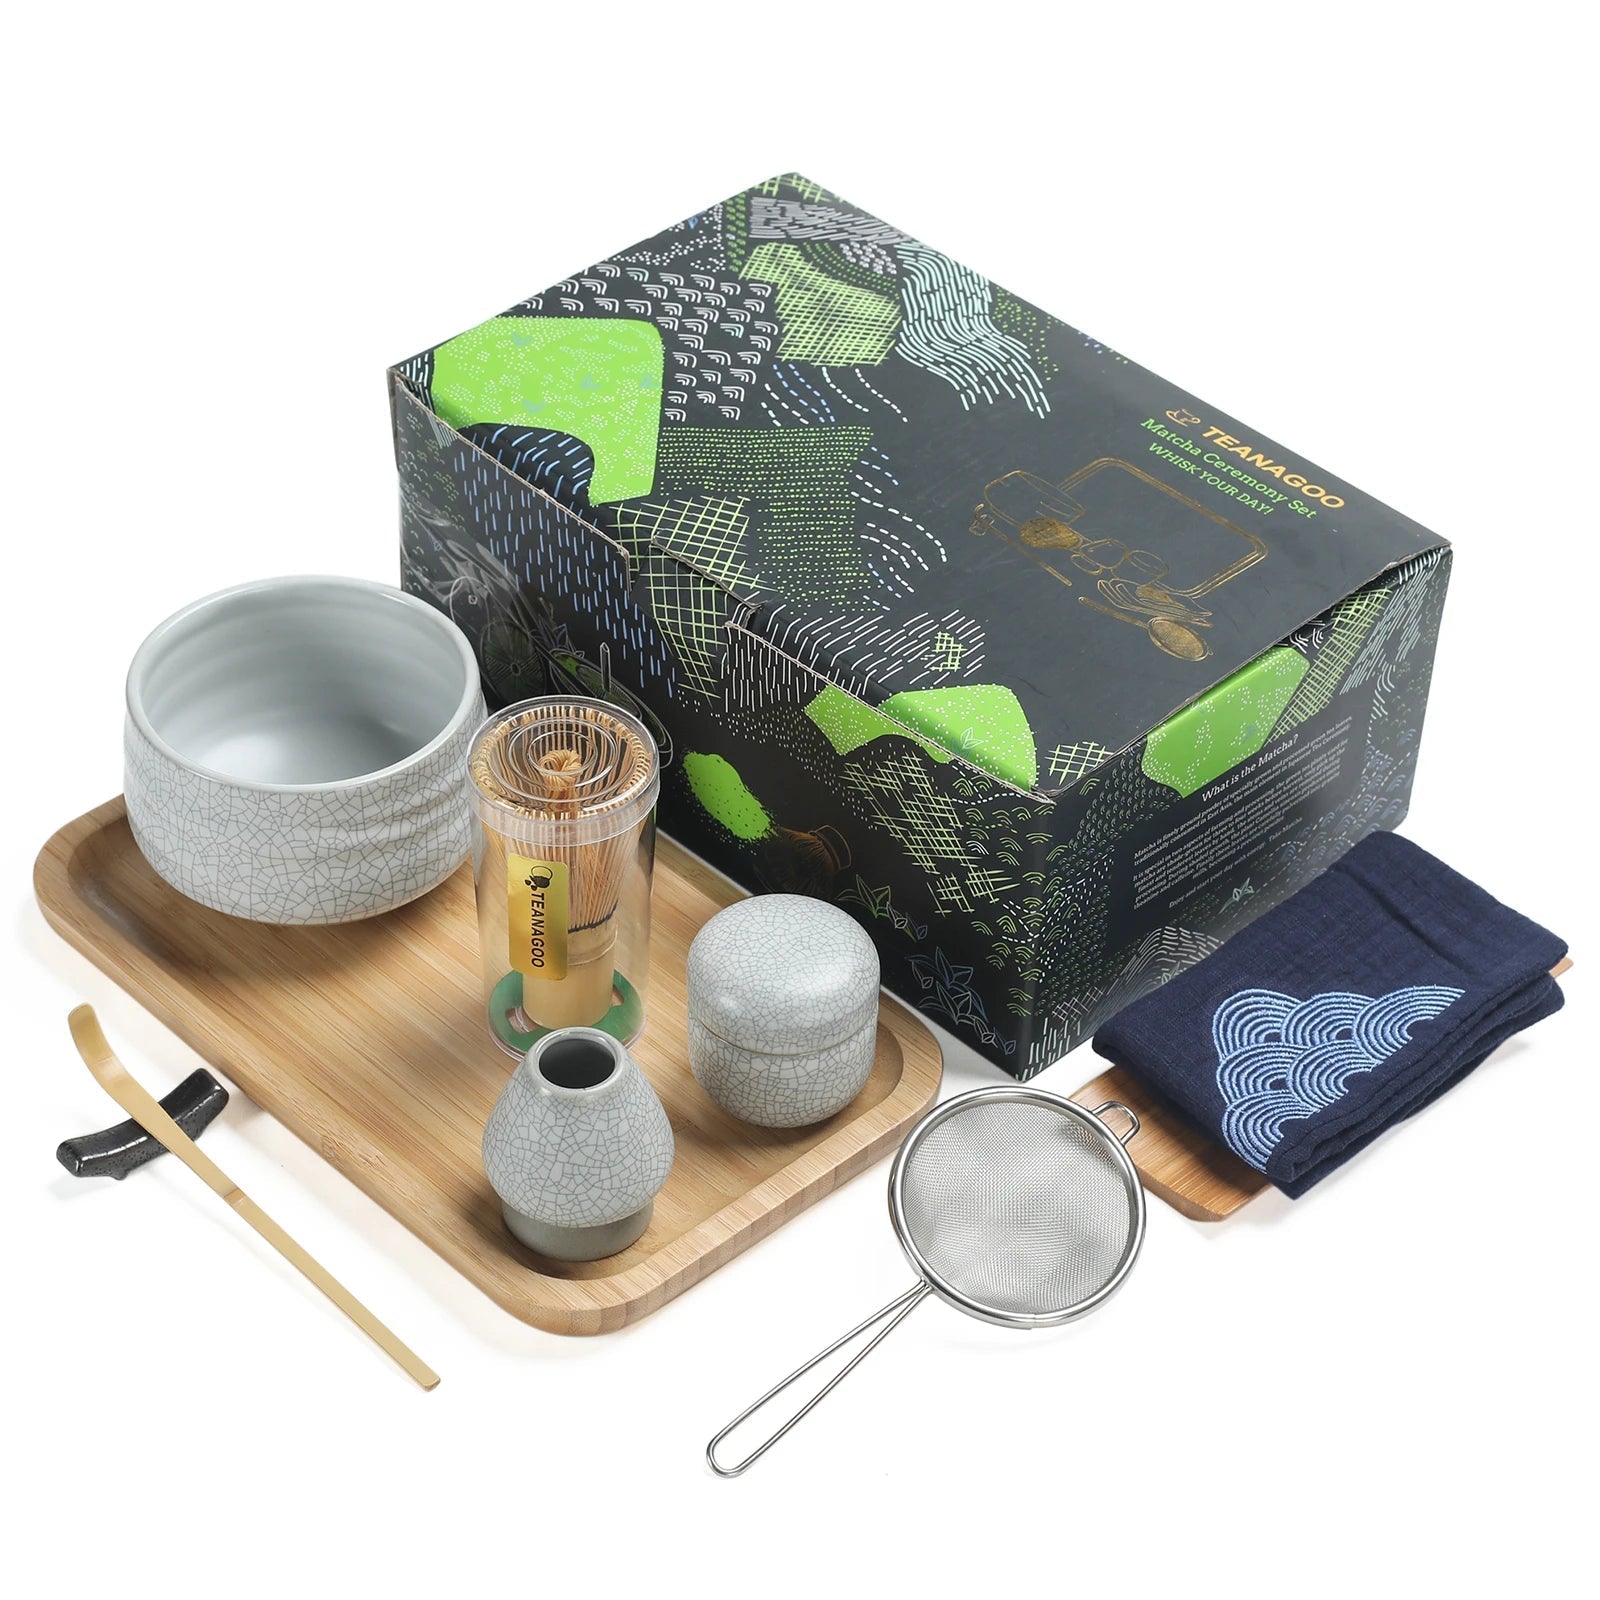 https://www.teanagoo.com/cdn/shop/products/luxury-japanese-matcha-tea-set-with-bamboo-tea-tray-canister-various-color-293426.jpg?v=1659432995&width=1920